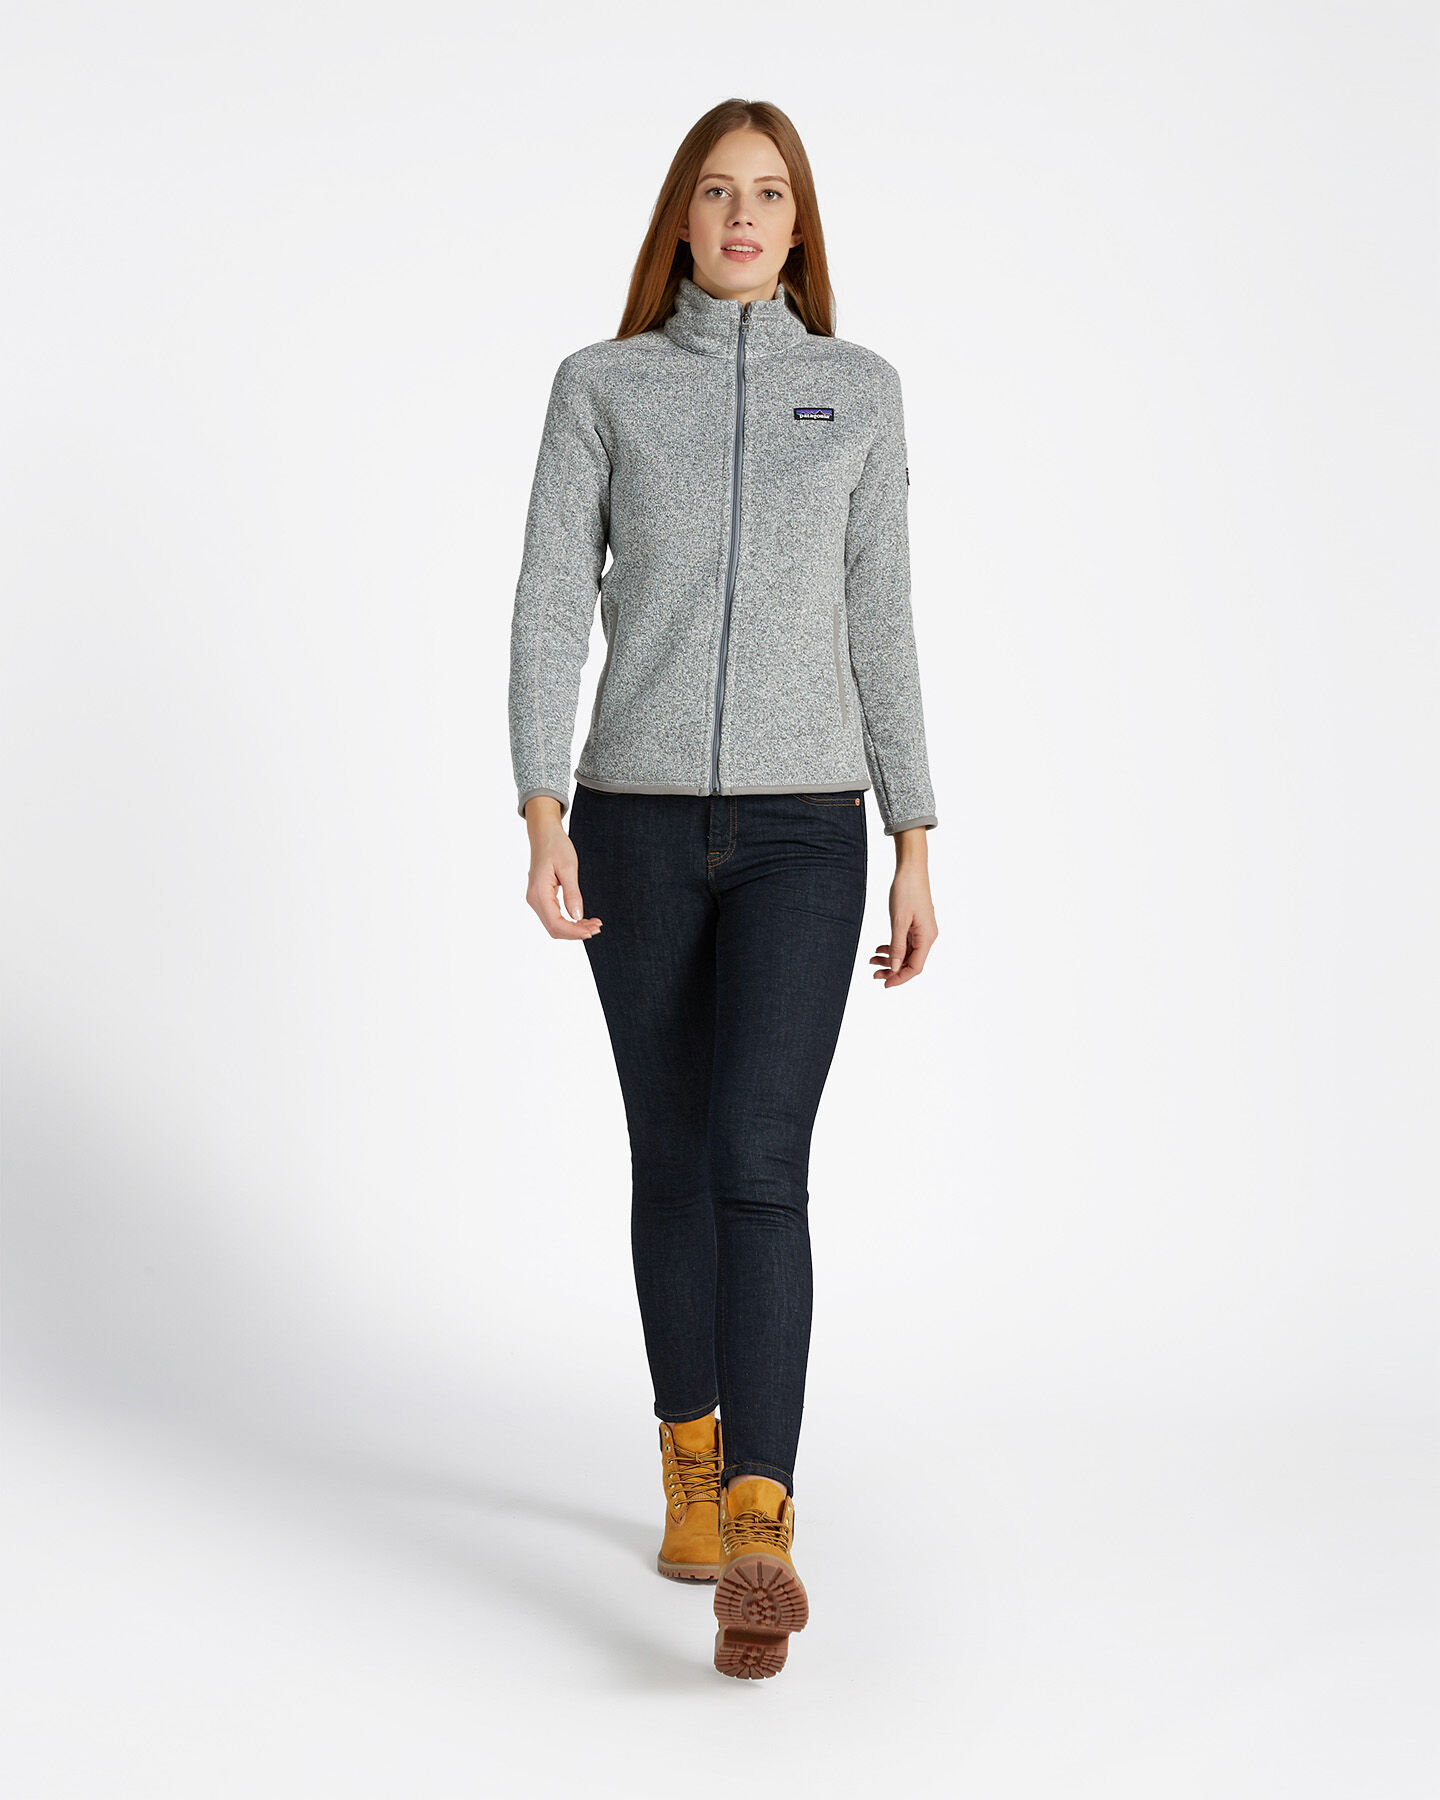  Pile PATAGONIA BETTER SWEATER FLEECE FZ W S5628782|NTPL|XS scatto 3